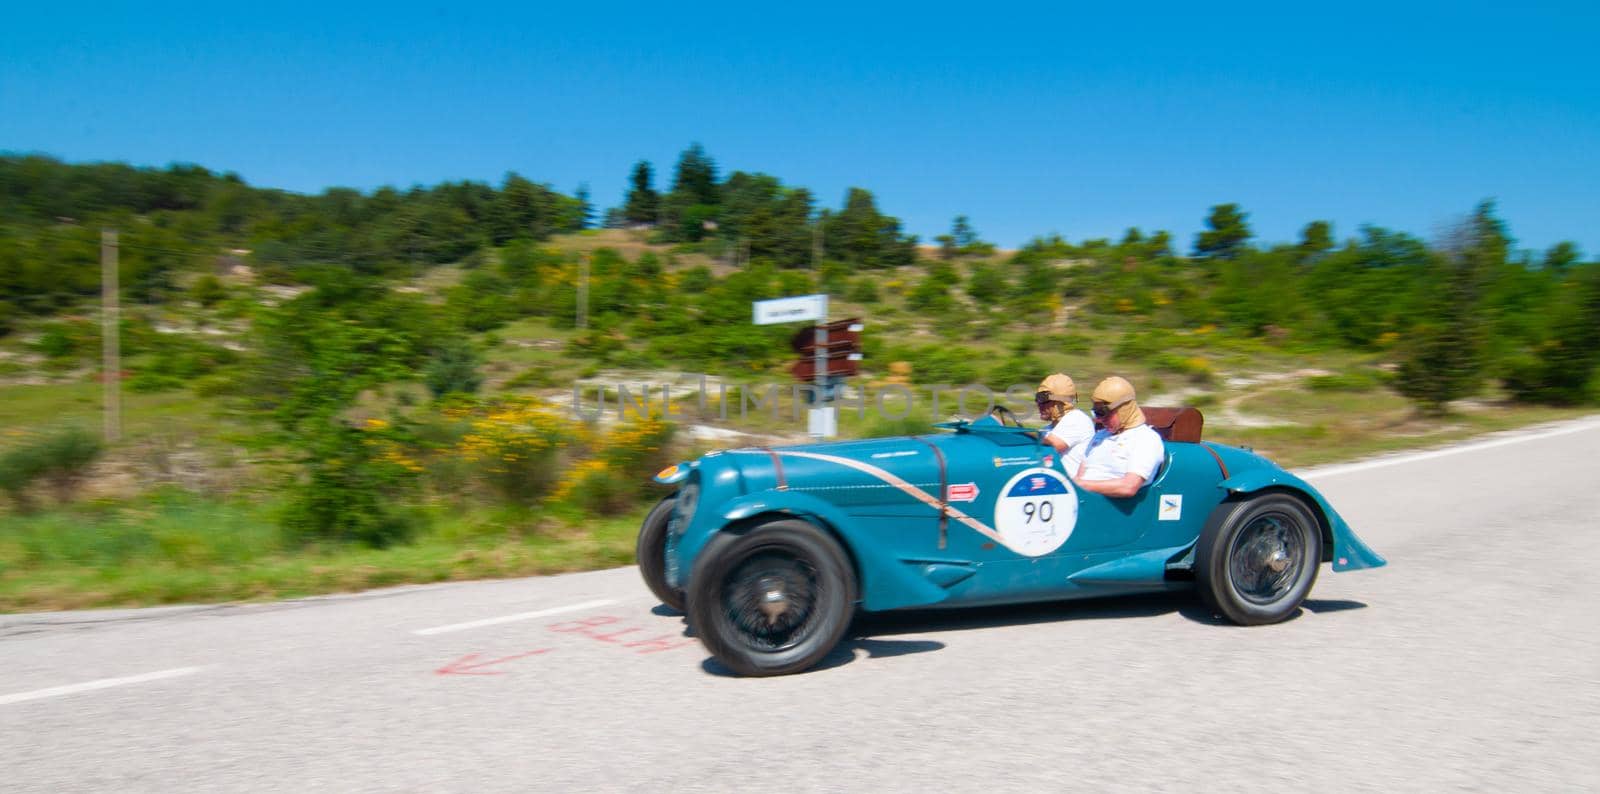 DELAHAYE 135 CS 1935 on an old racing car in rally Mille Miglia 2022 the famous italian historical race (1927-1957 by massimocampanari